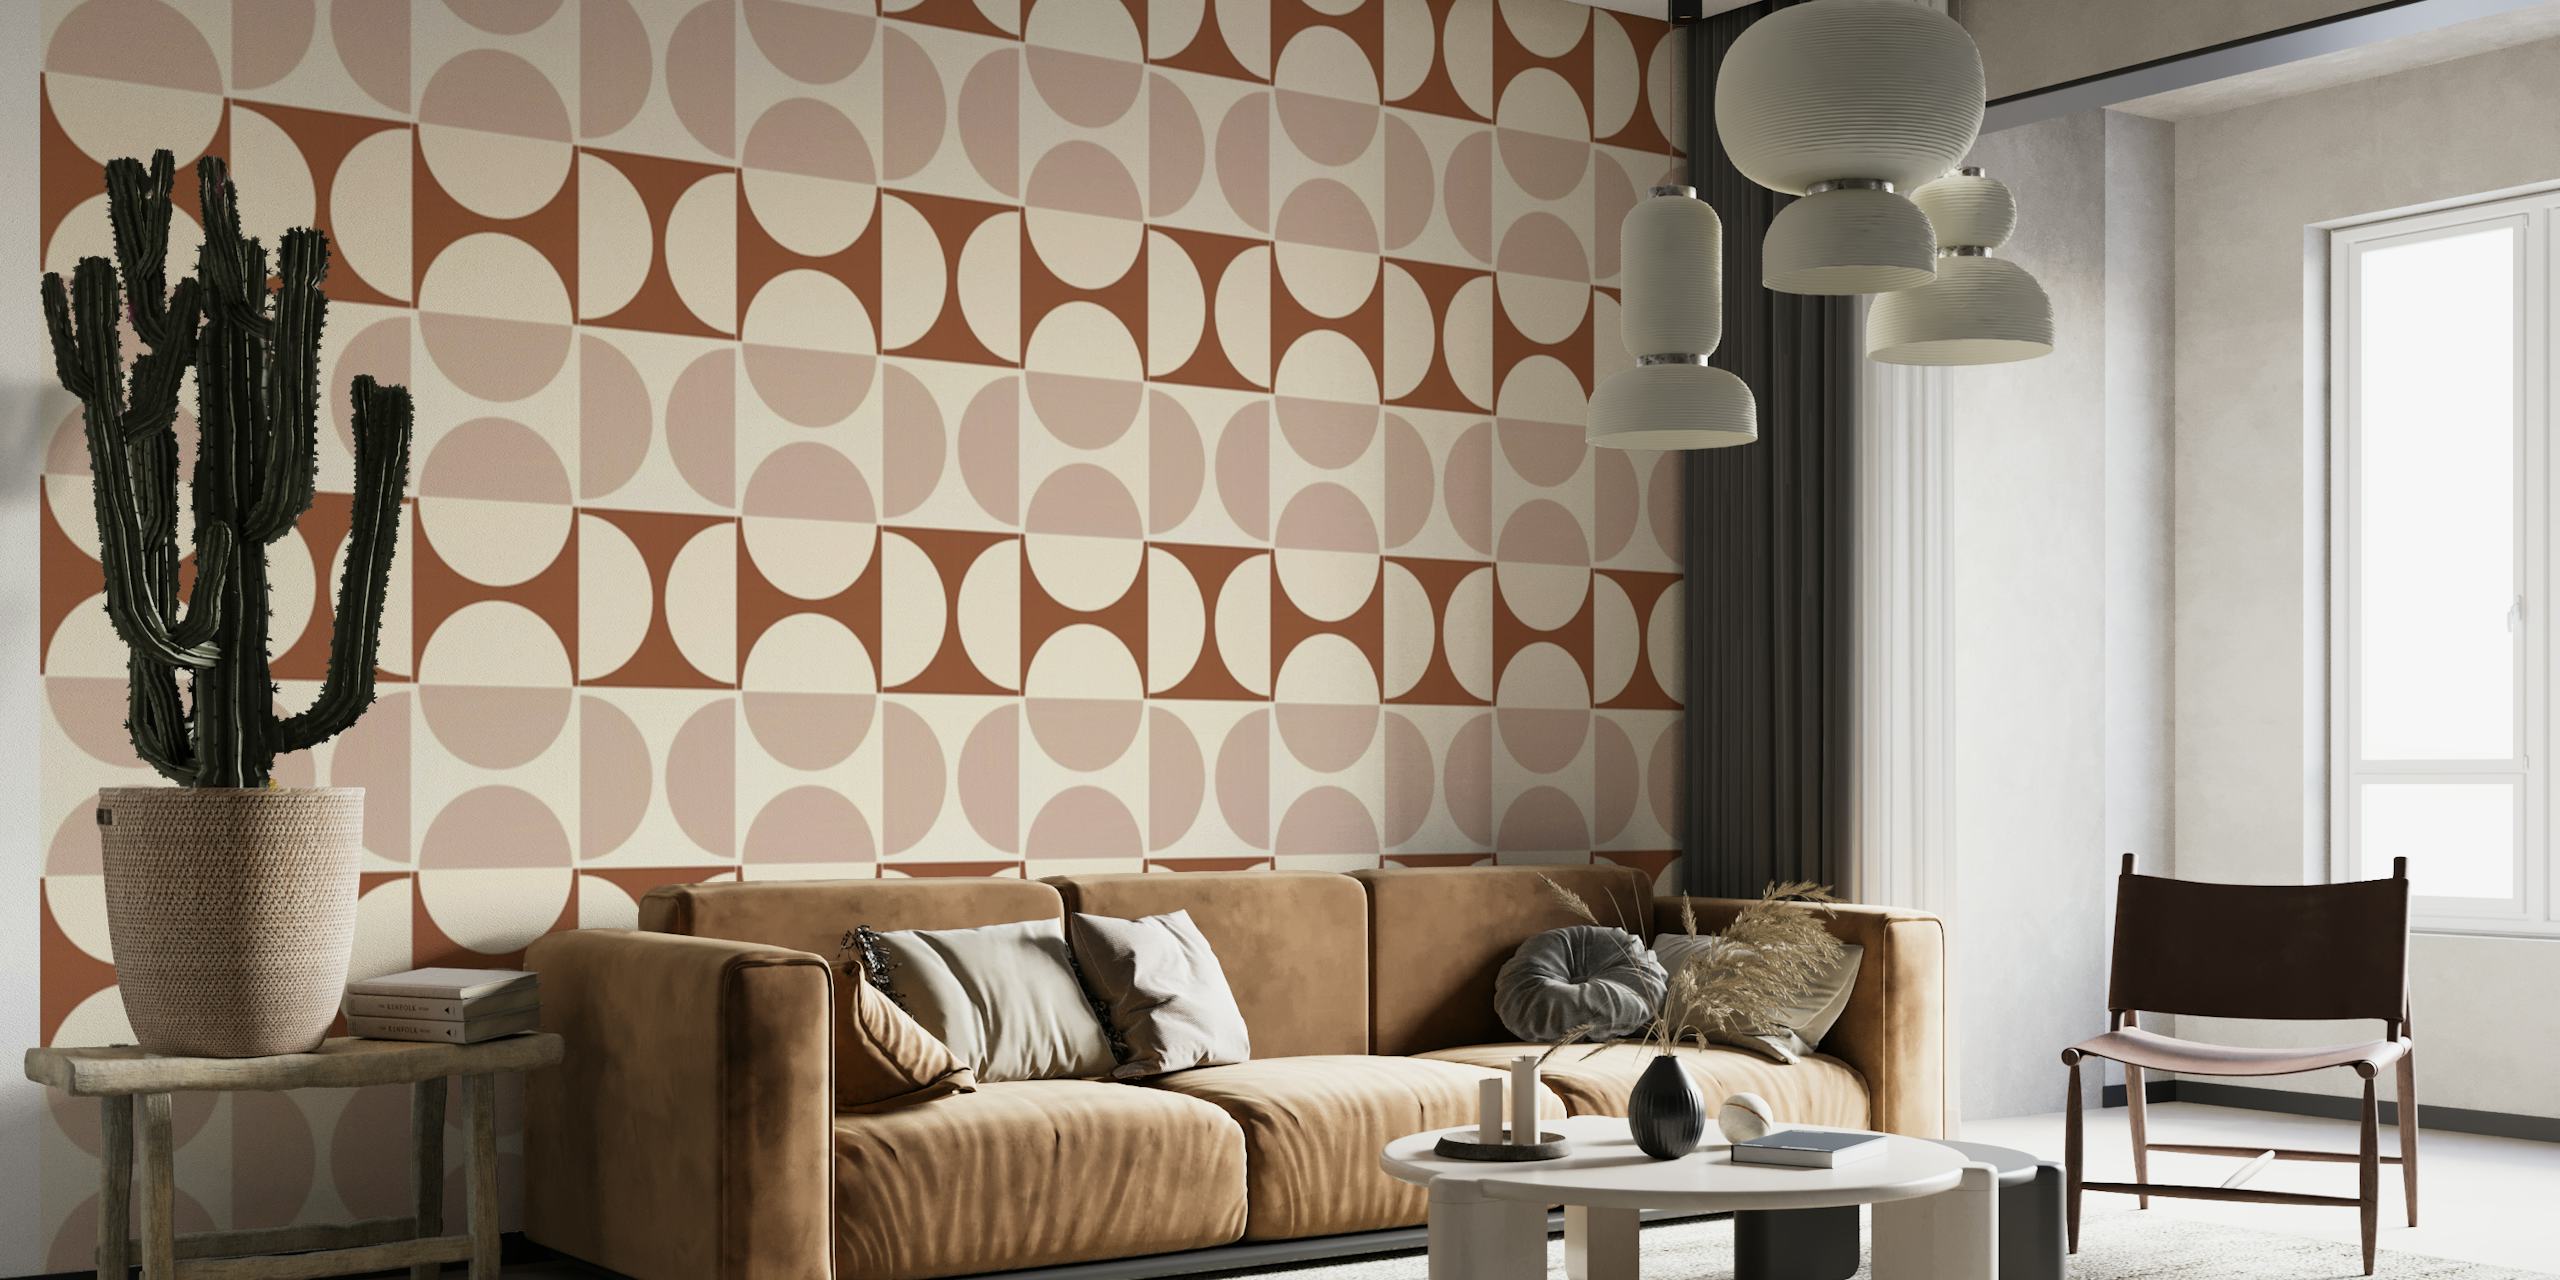 Cotto Tiles Cream and Powder Lines wallpaper